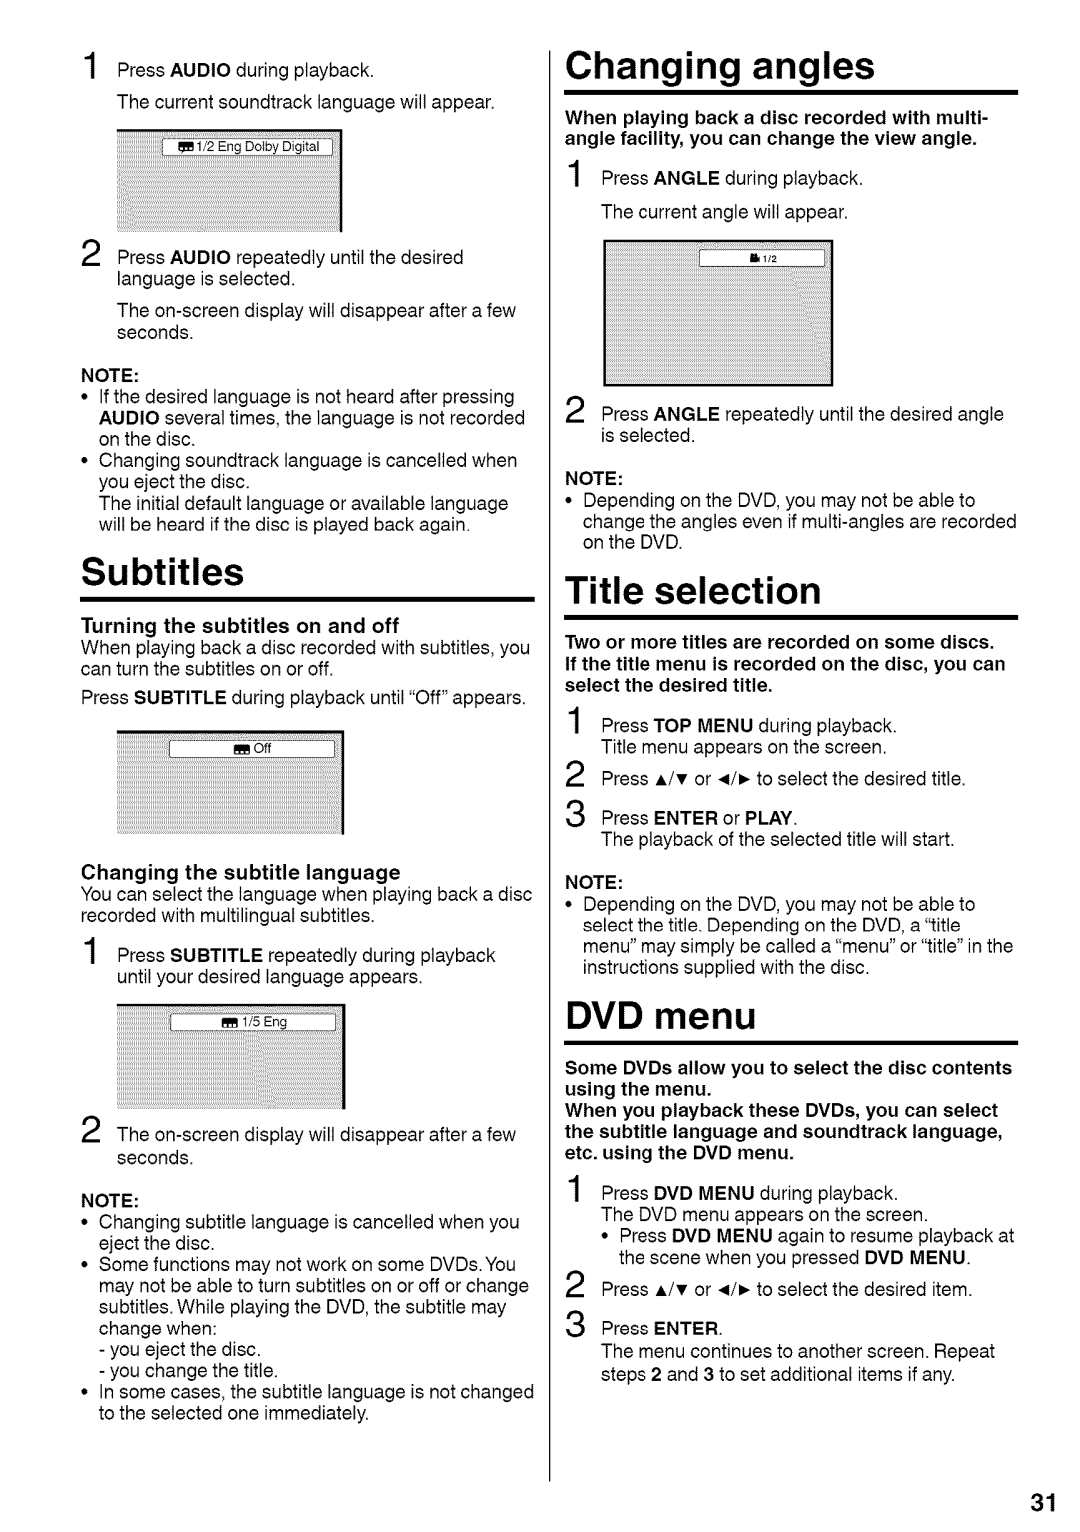 Sansui HDLCDVD220 owner manual Changing angles, Title selection, DVD menu 